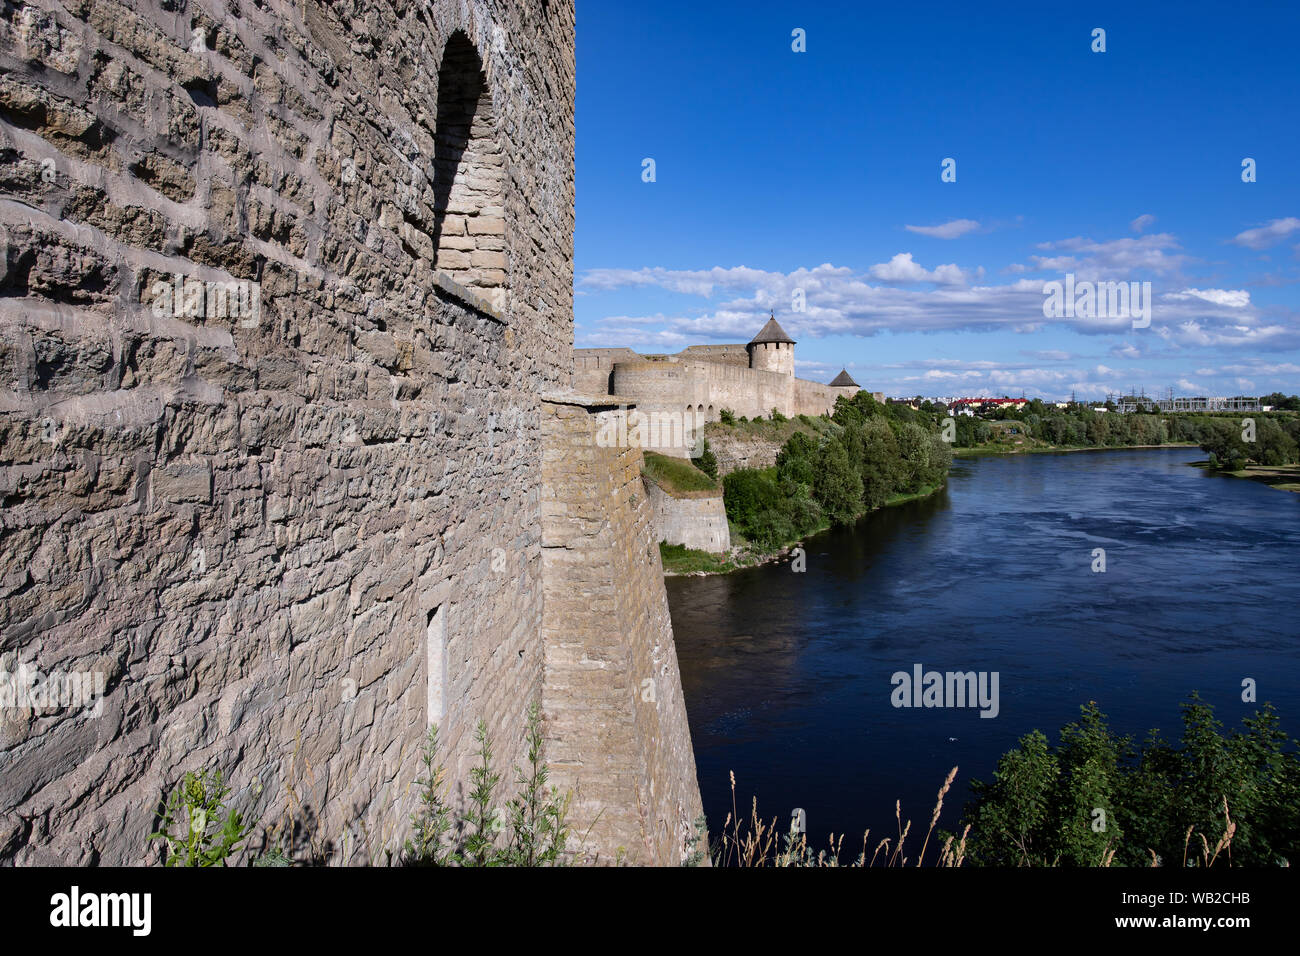 The medieval German castle in Estonia and the Russian fortress Ivangorod are separated by the Narva River. The bridge between them forms the border of Stock Photo